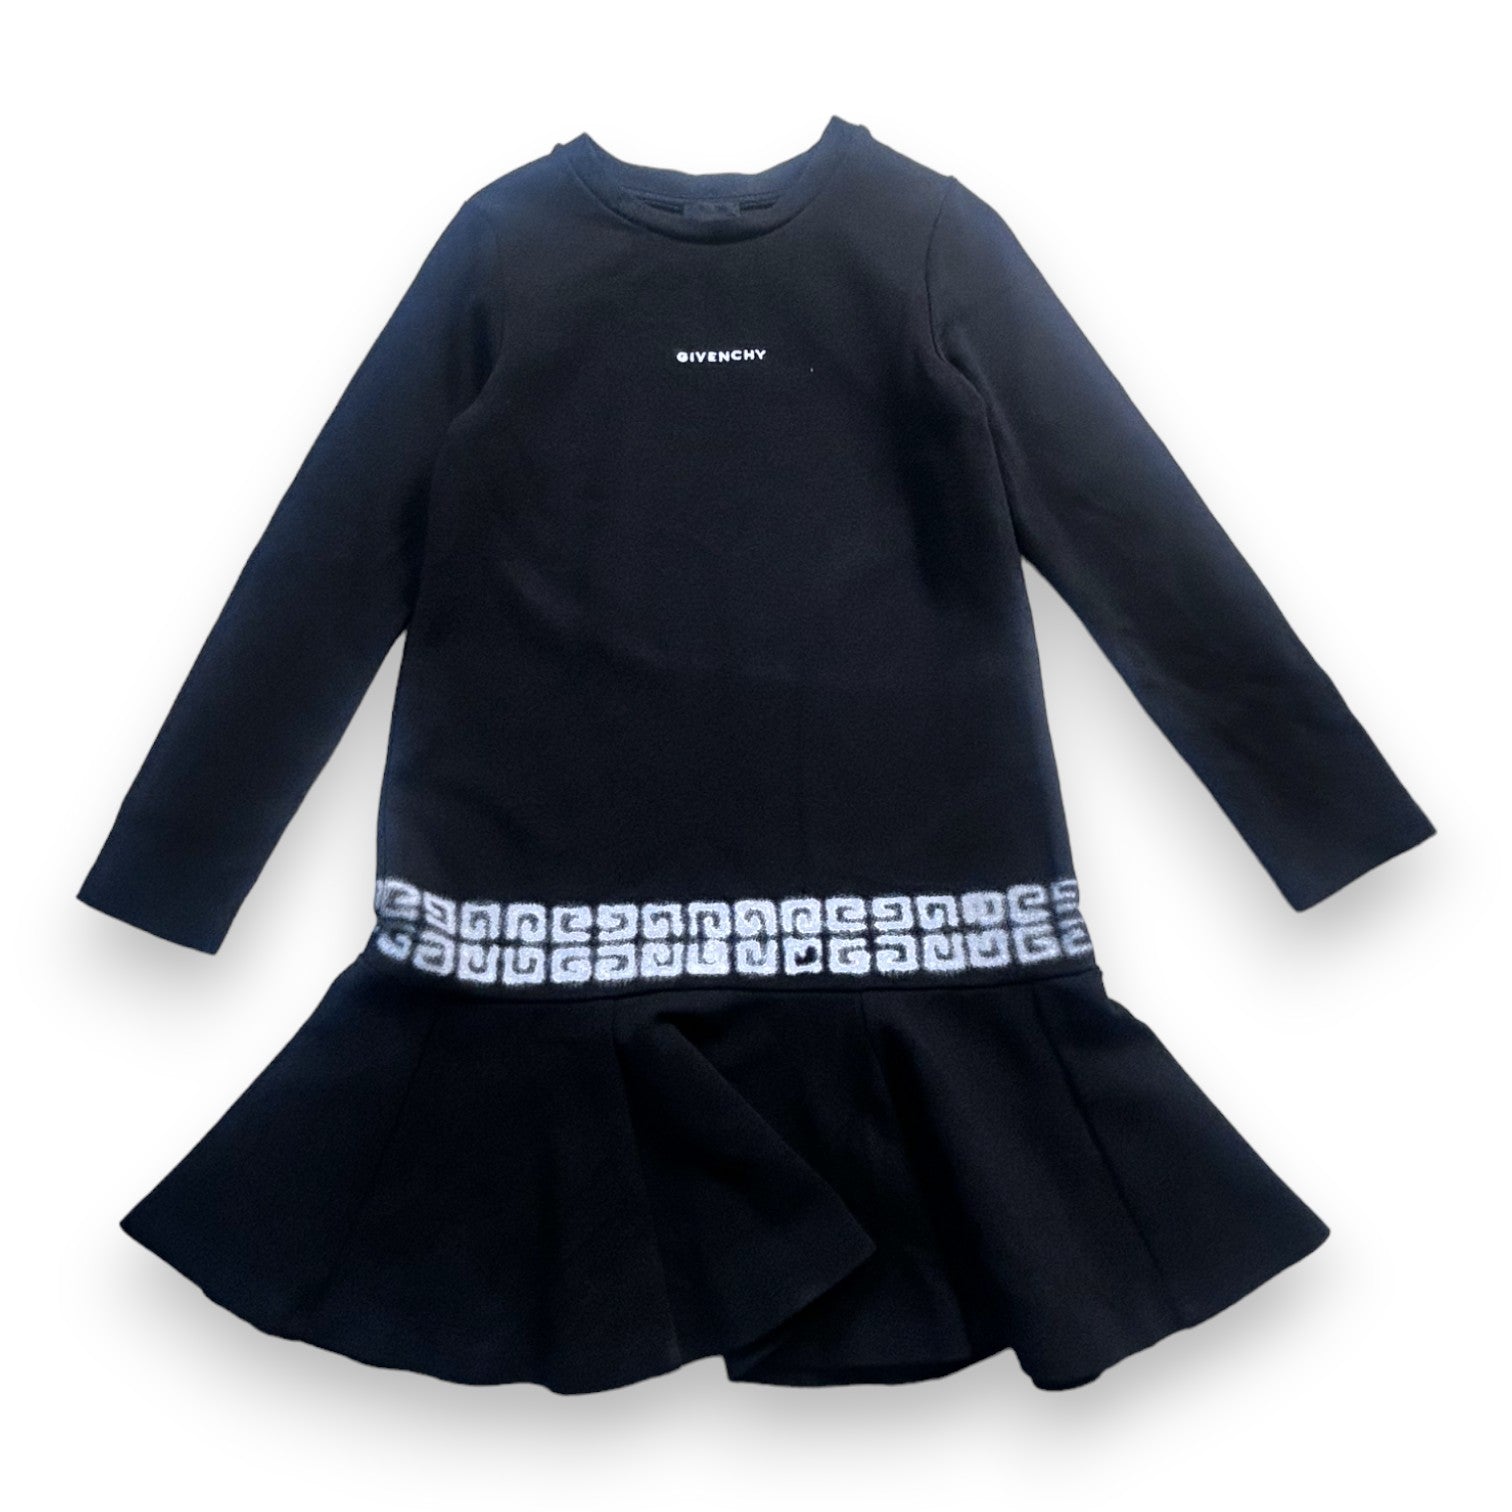 GIVENCHY - Robe noire - 8 ans